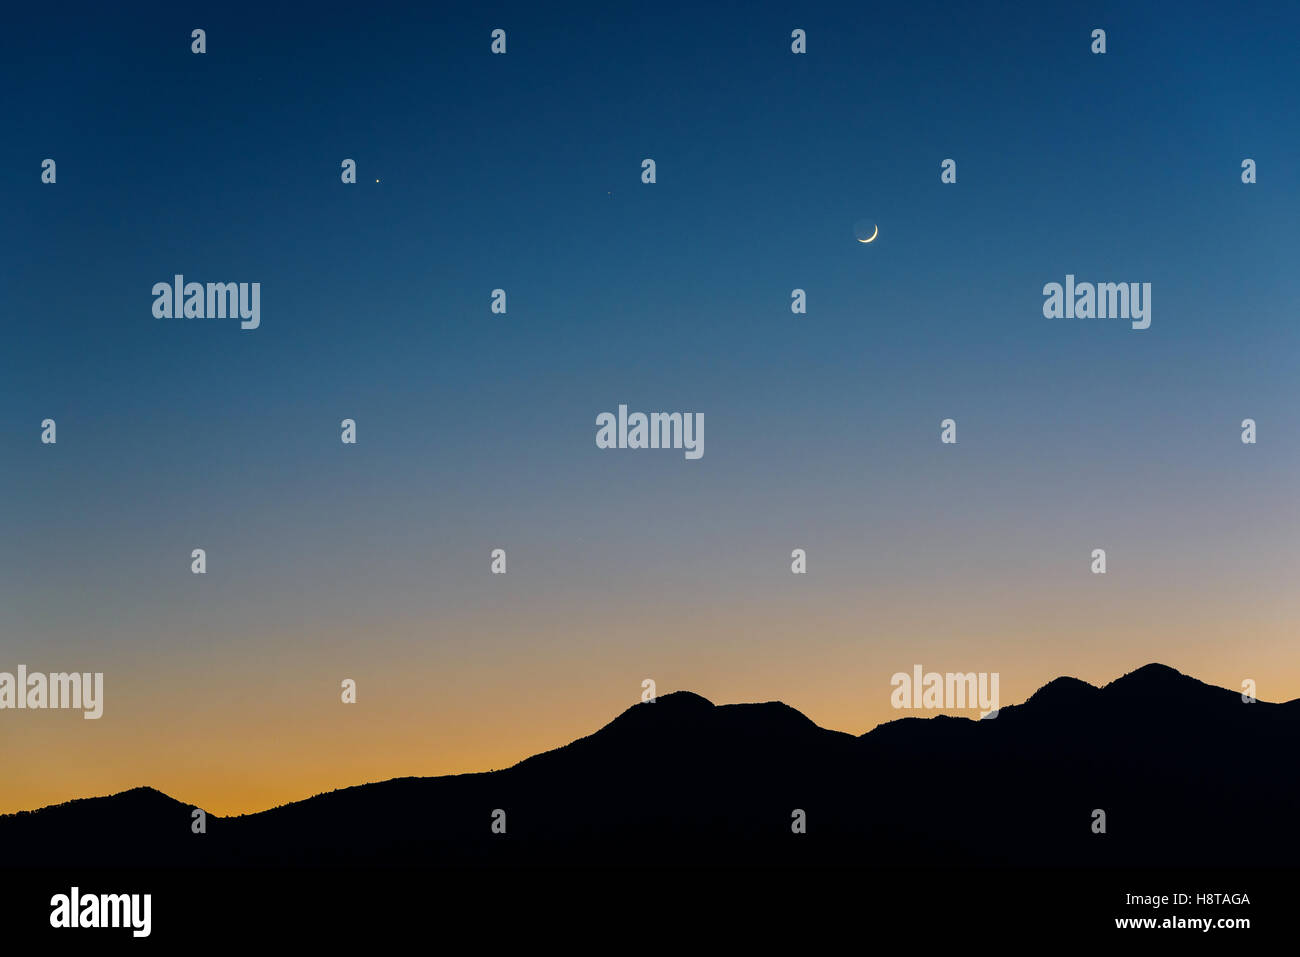 Waxing crescent Moon, Venus (left) and Saturn (middle) at dusk. Silhouette of mountains near Kathmandu in Nepal. Stock Photo